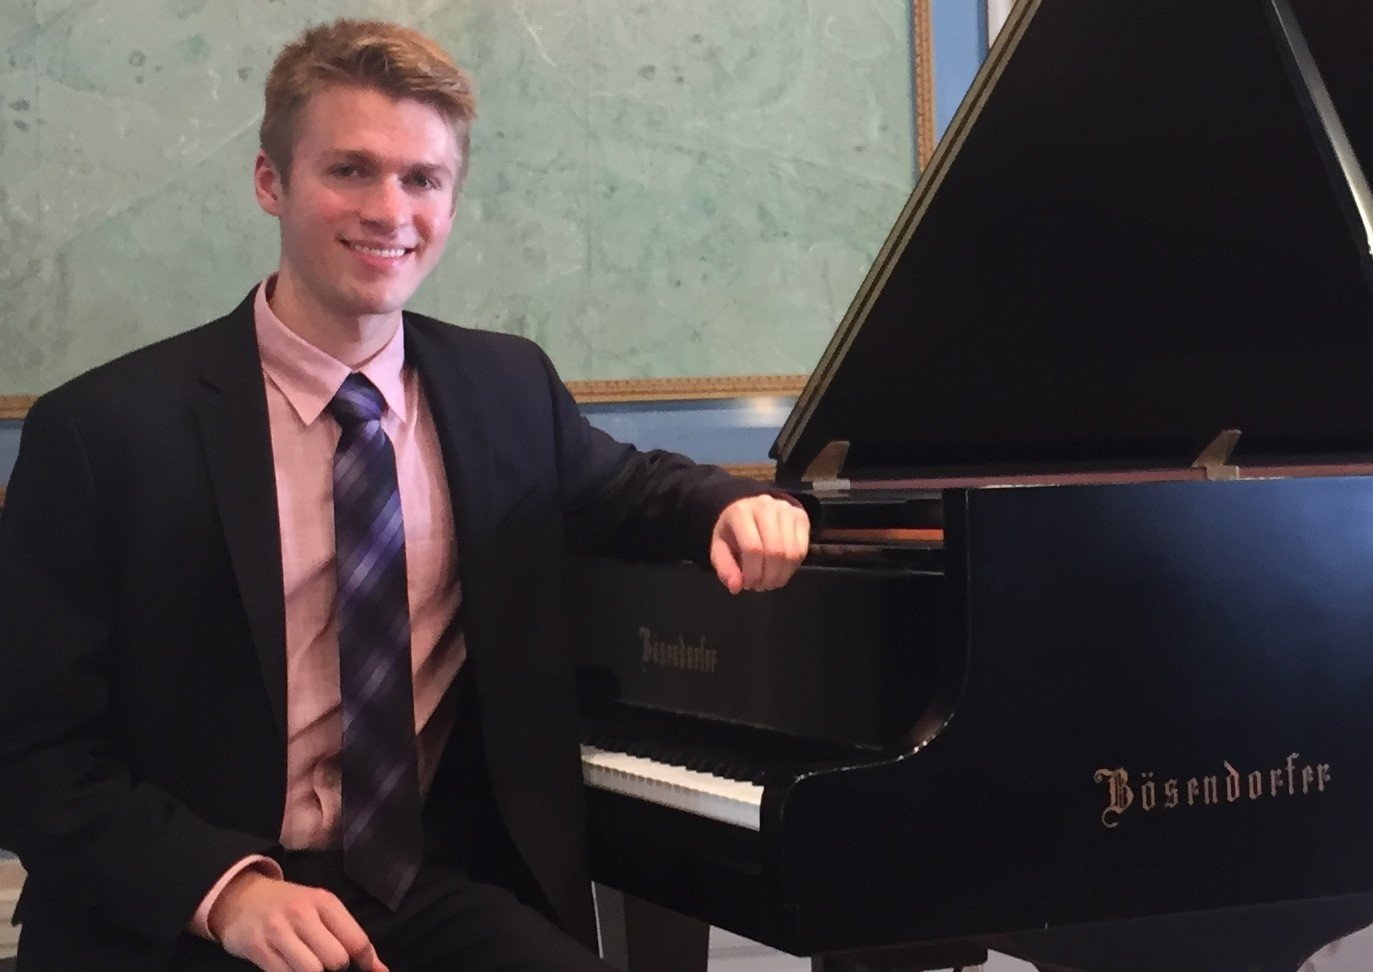 Garrett Snedeker wearing a jacket and tie, seated, and resting one arm on top of a grand piano.